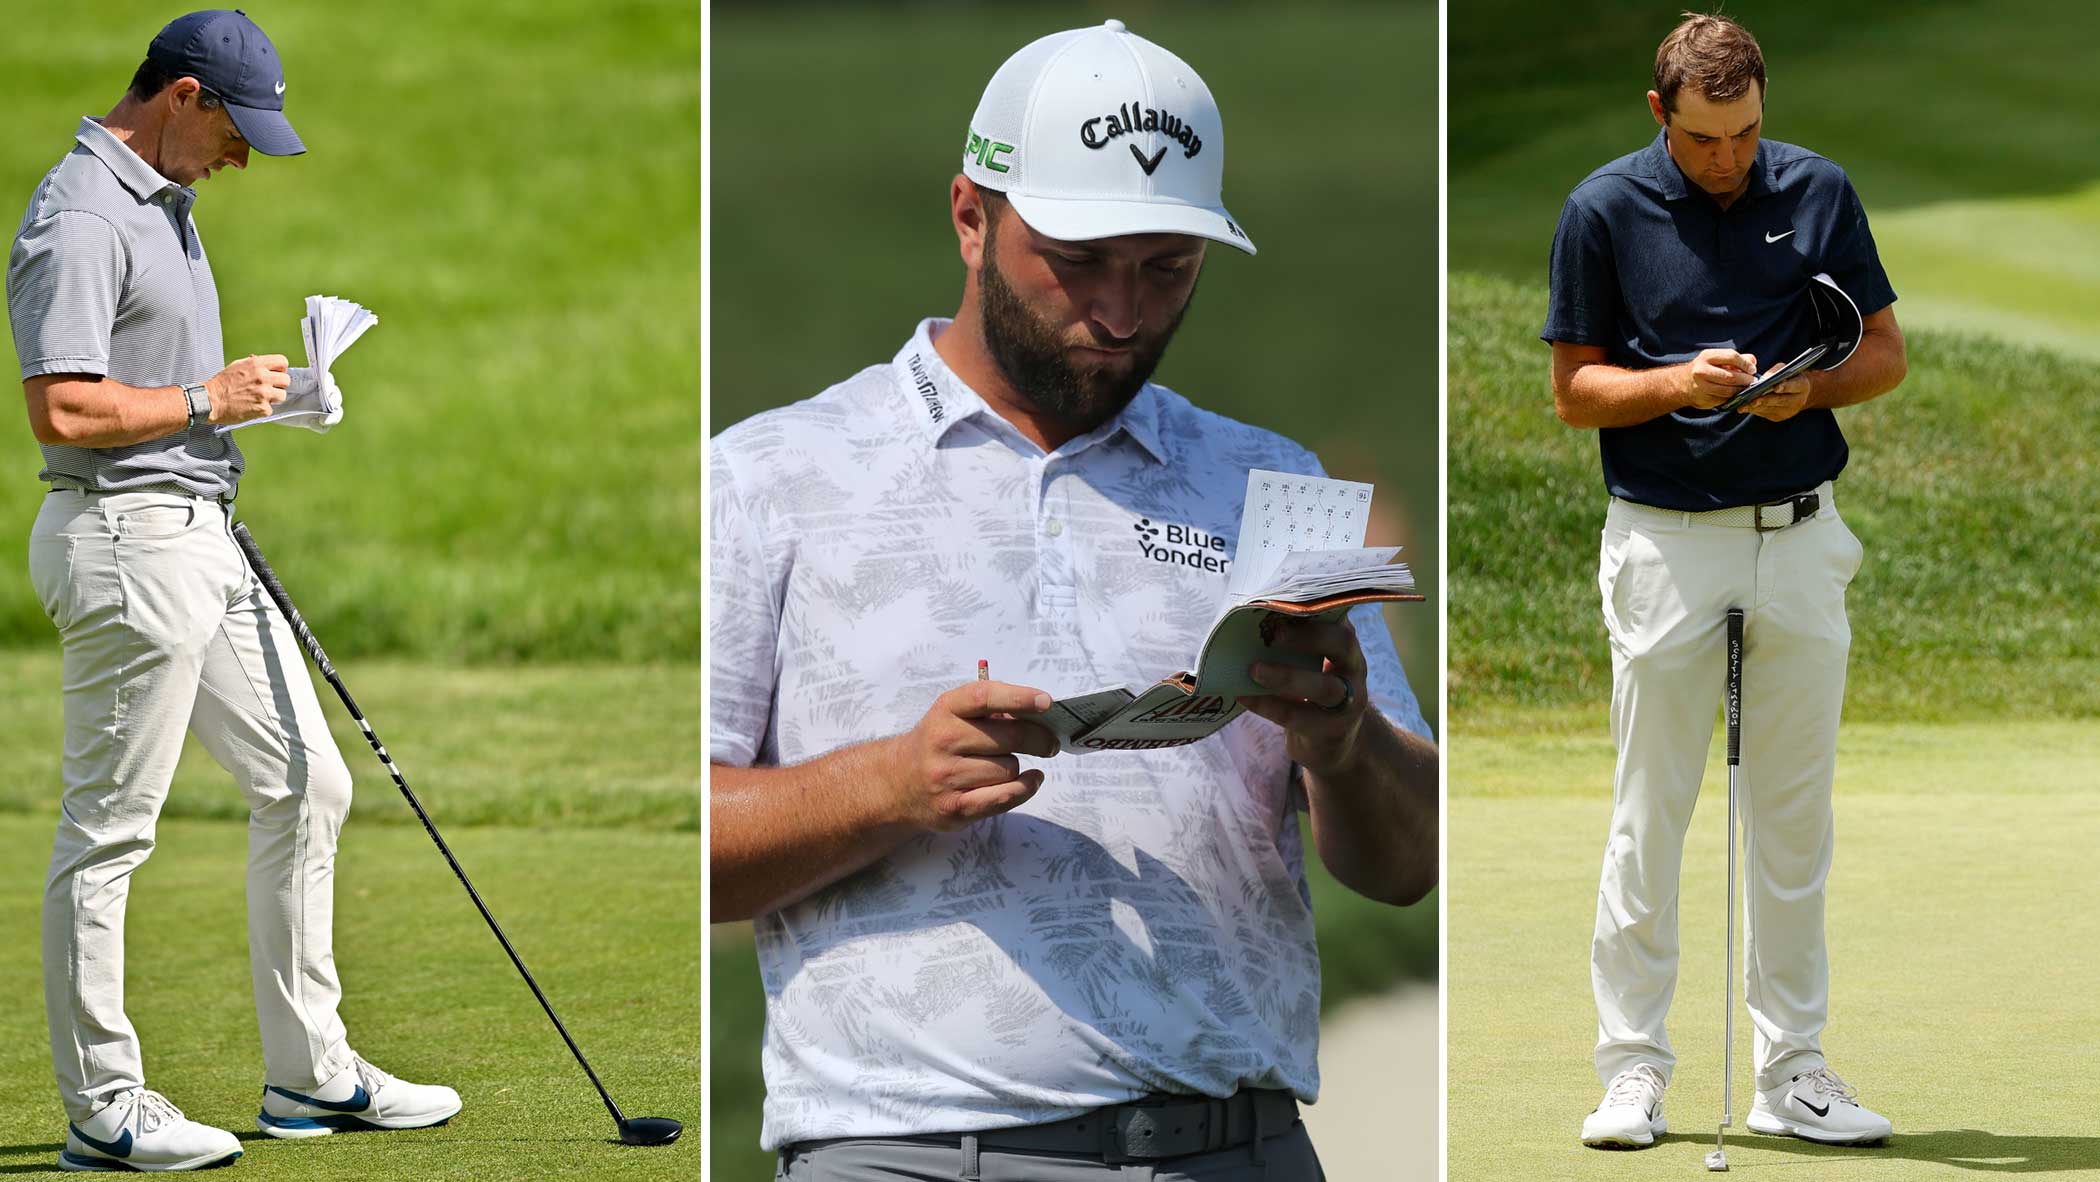 The handicaps of the world's best male golfers? We crunched the numbers